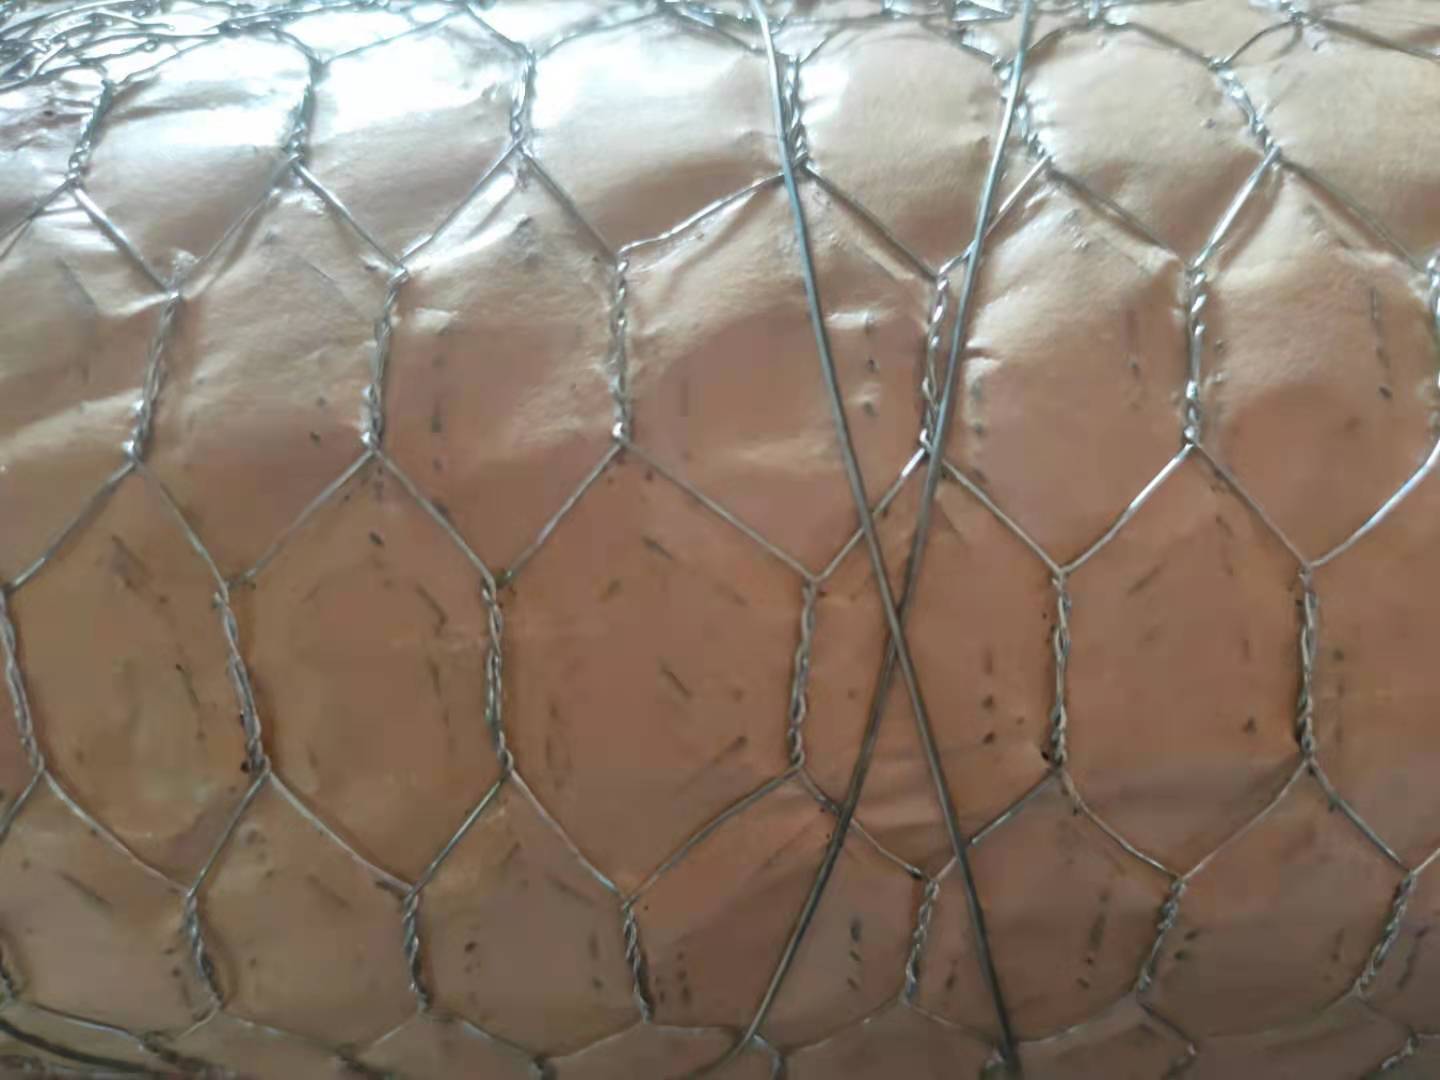 How the chicken wire is produced